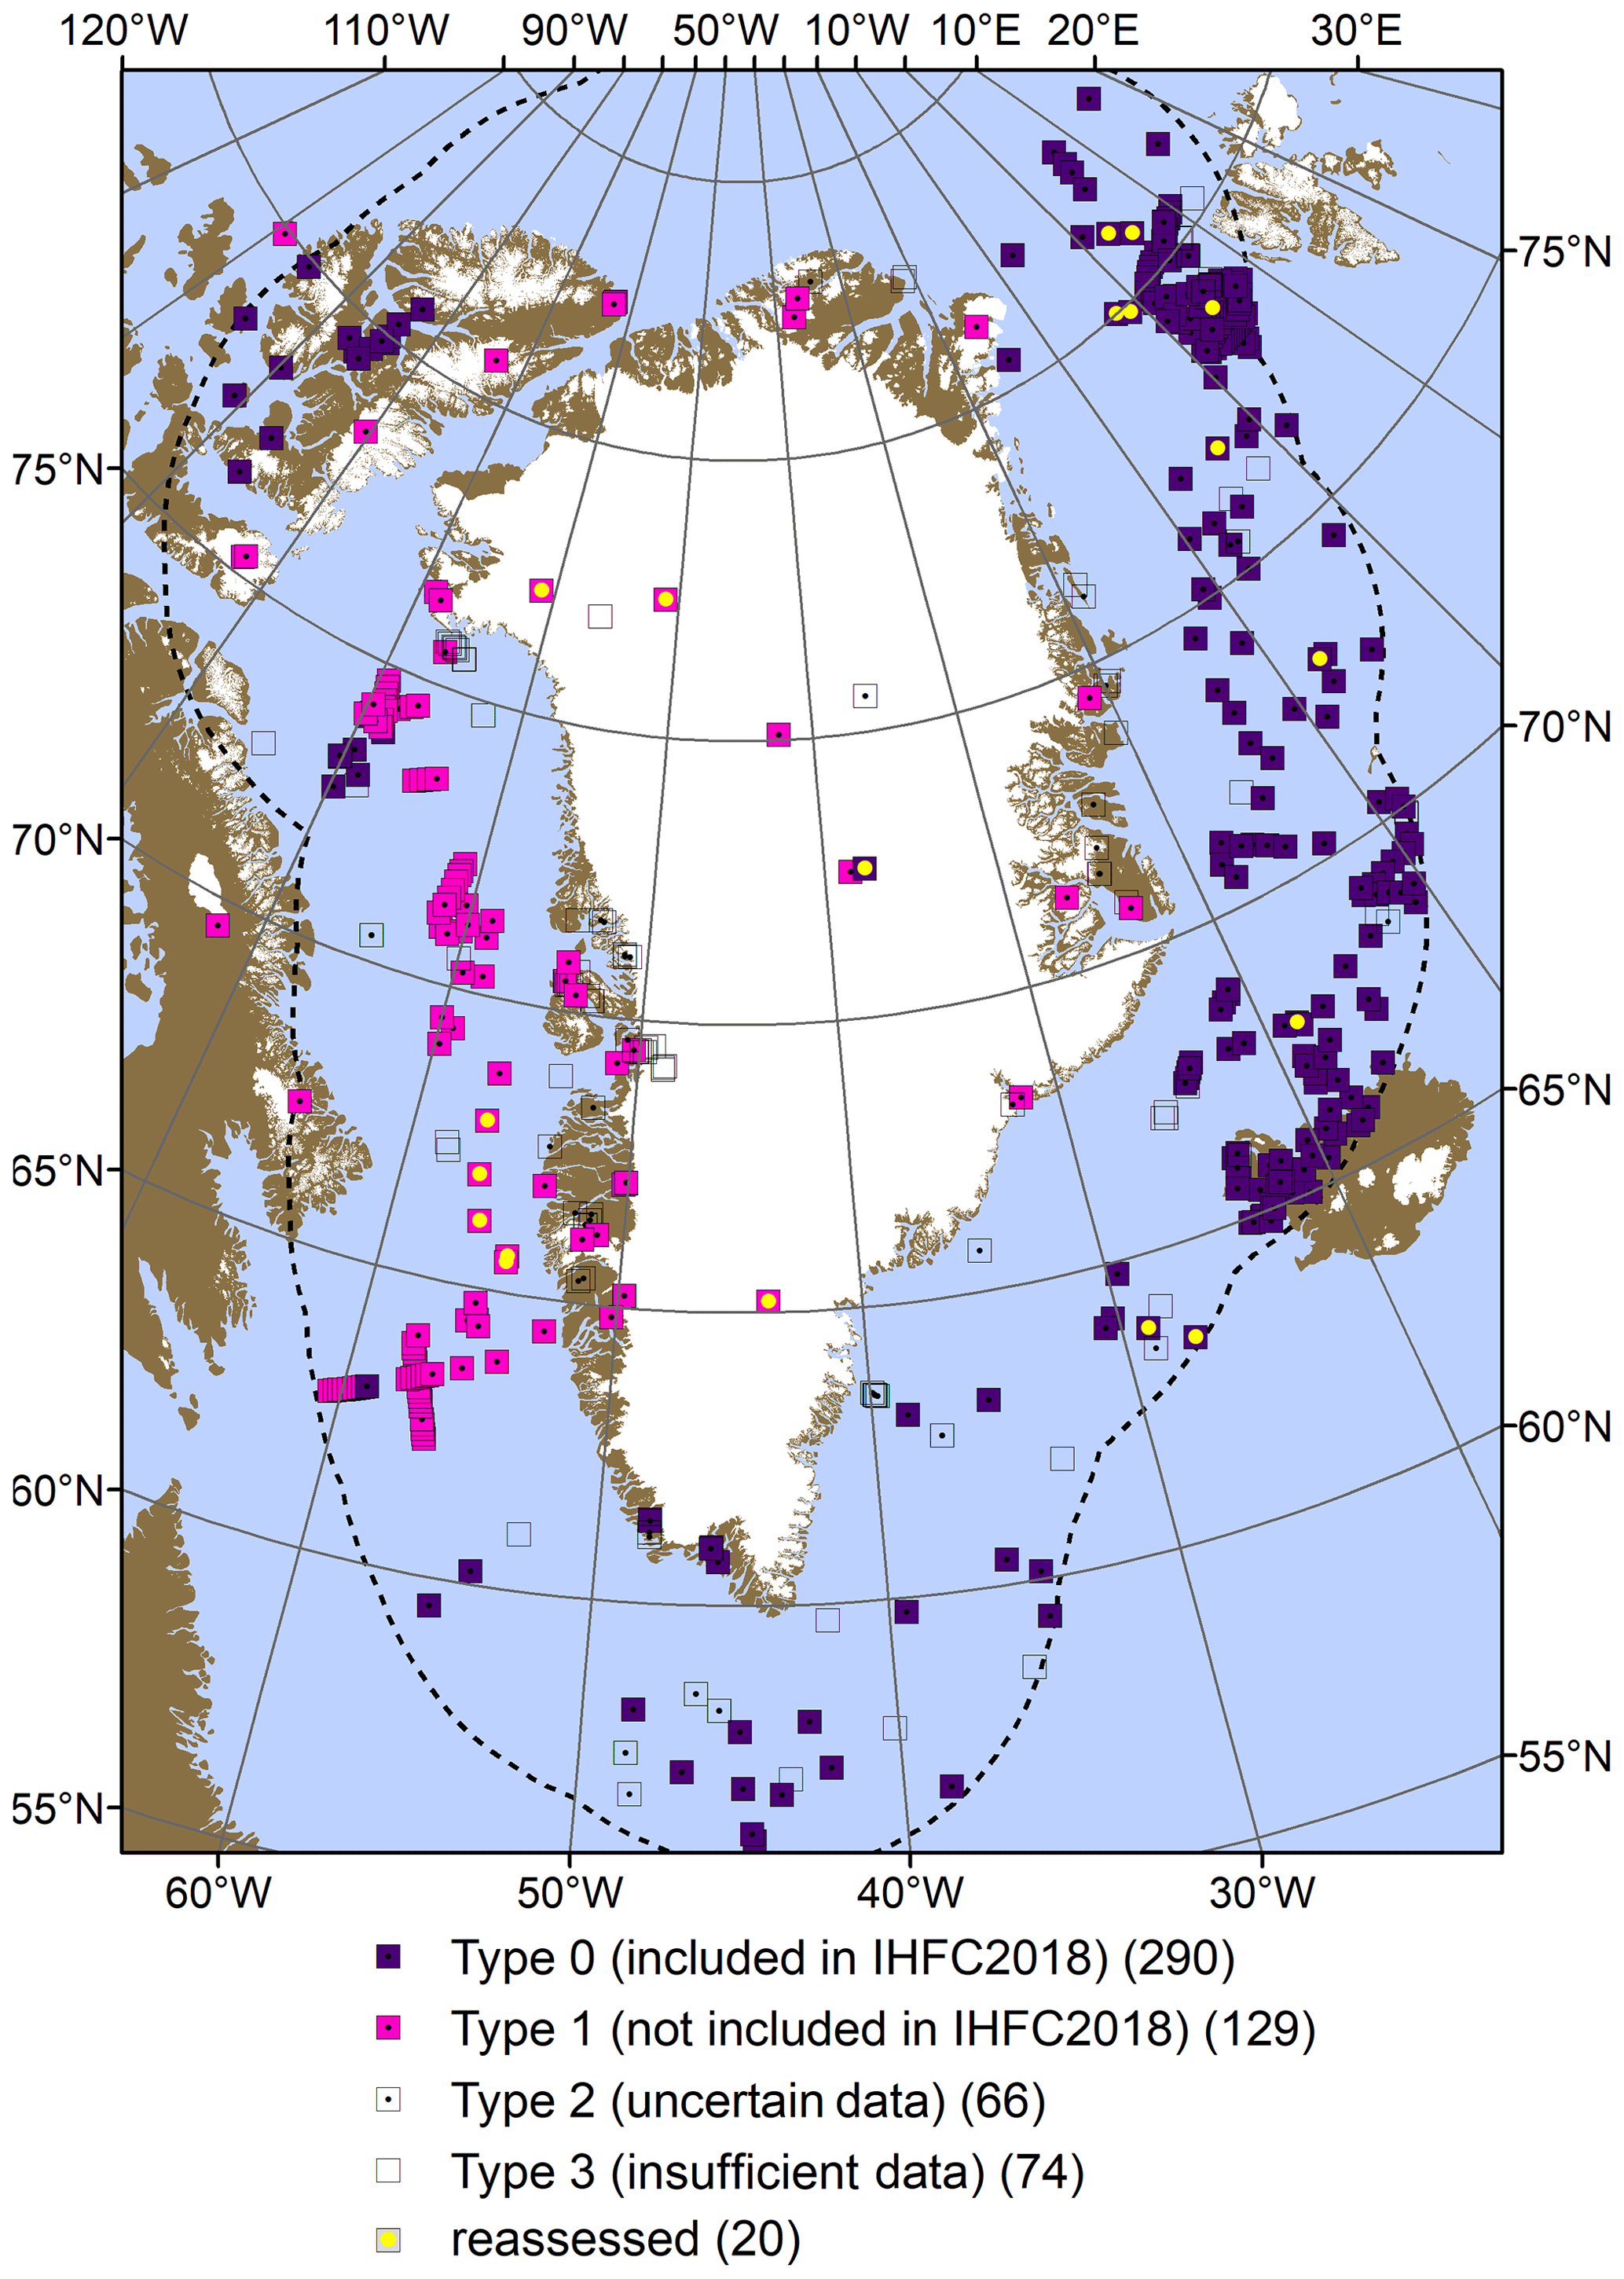 ESSD - Greenland Geothermal Heat Flow Database and Map (Version 1)